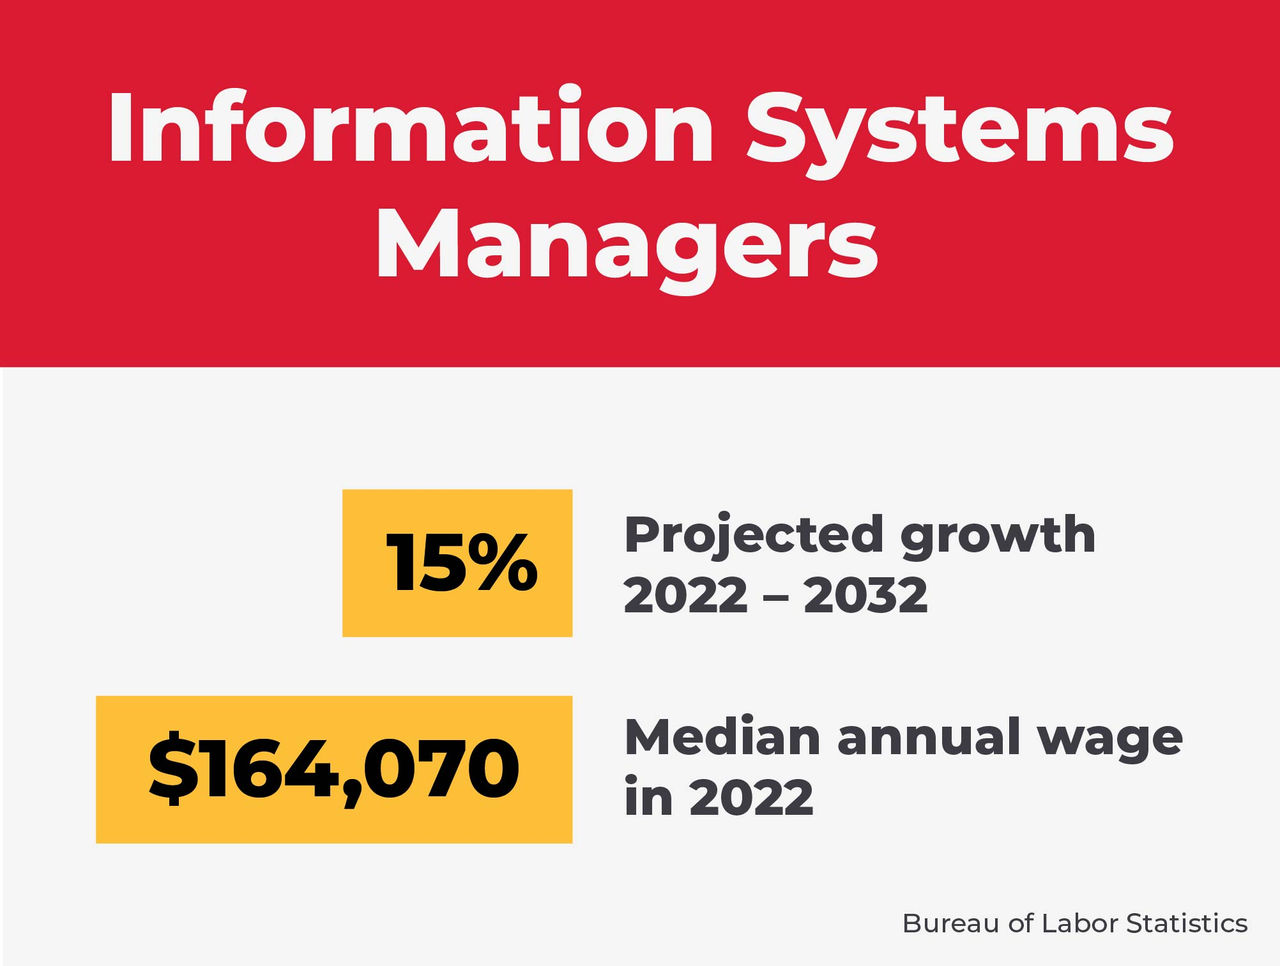 Text that reads, "Information Systems Managers; 15% Projected growth 2022-2032; $164,070 Median annual wage in 2022."